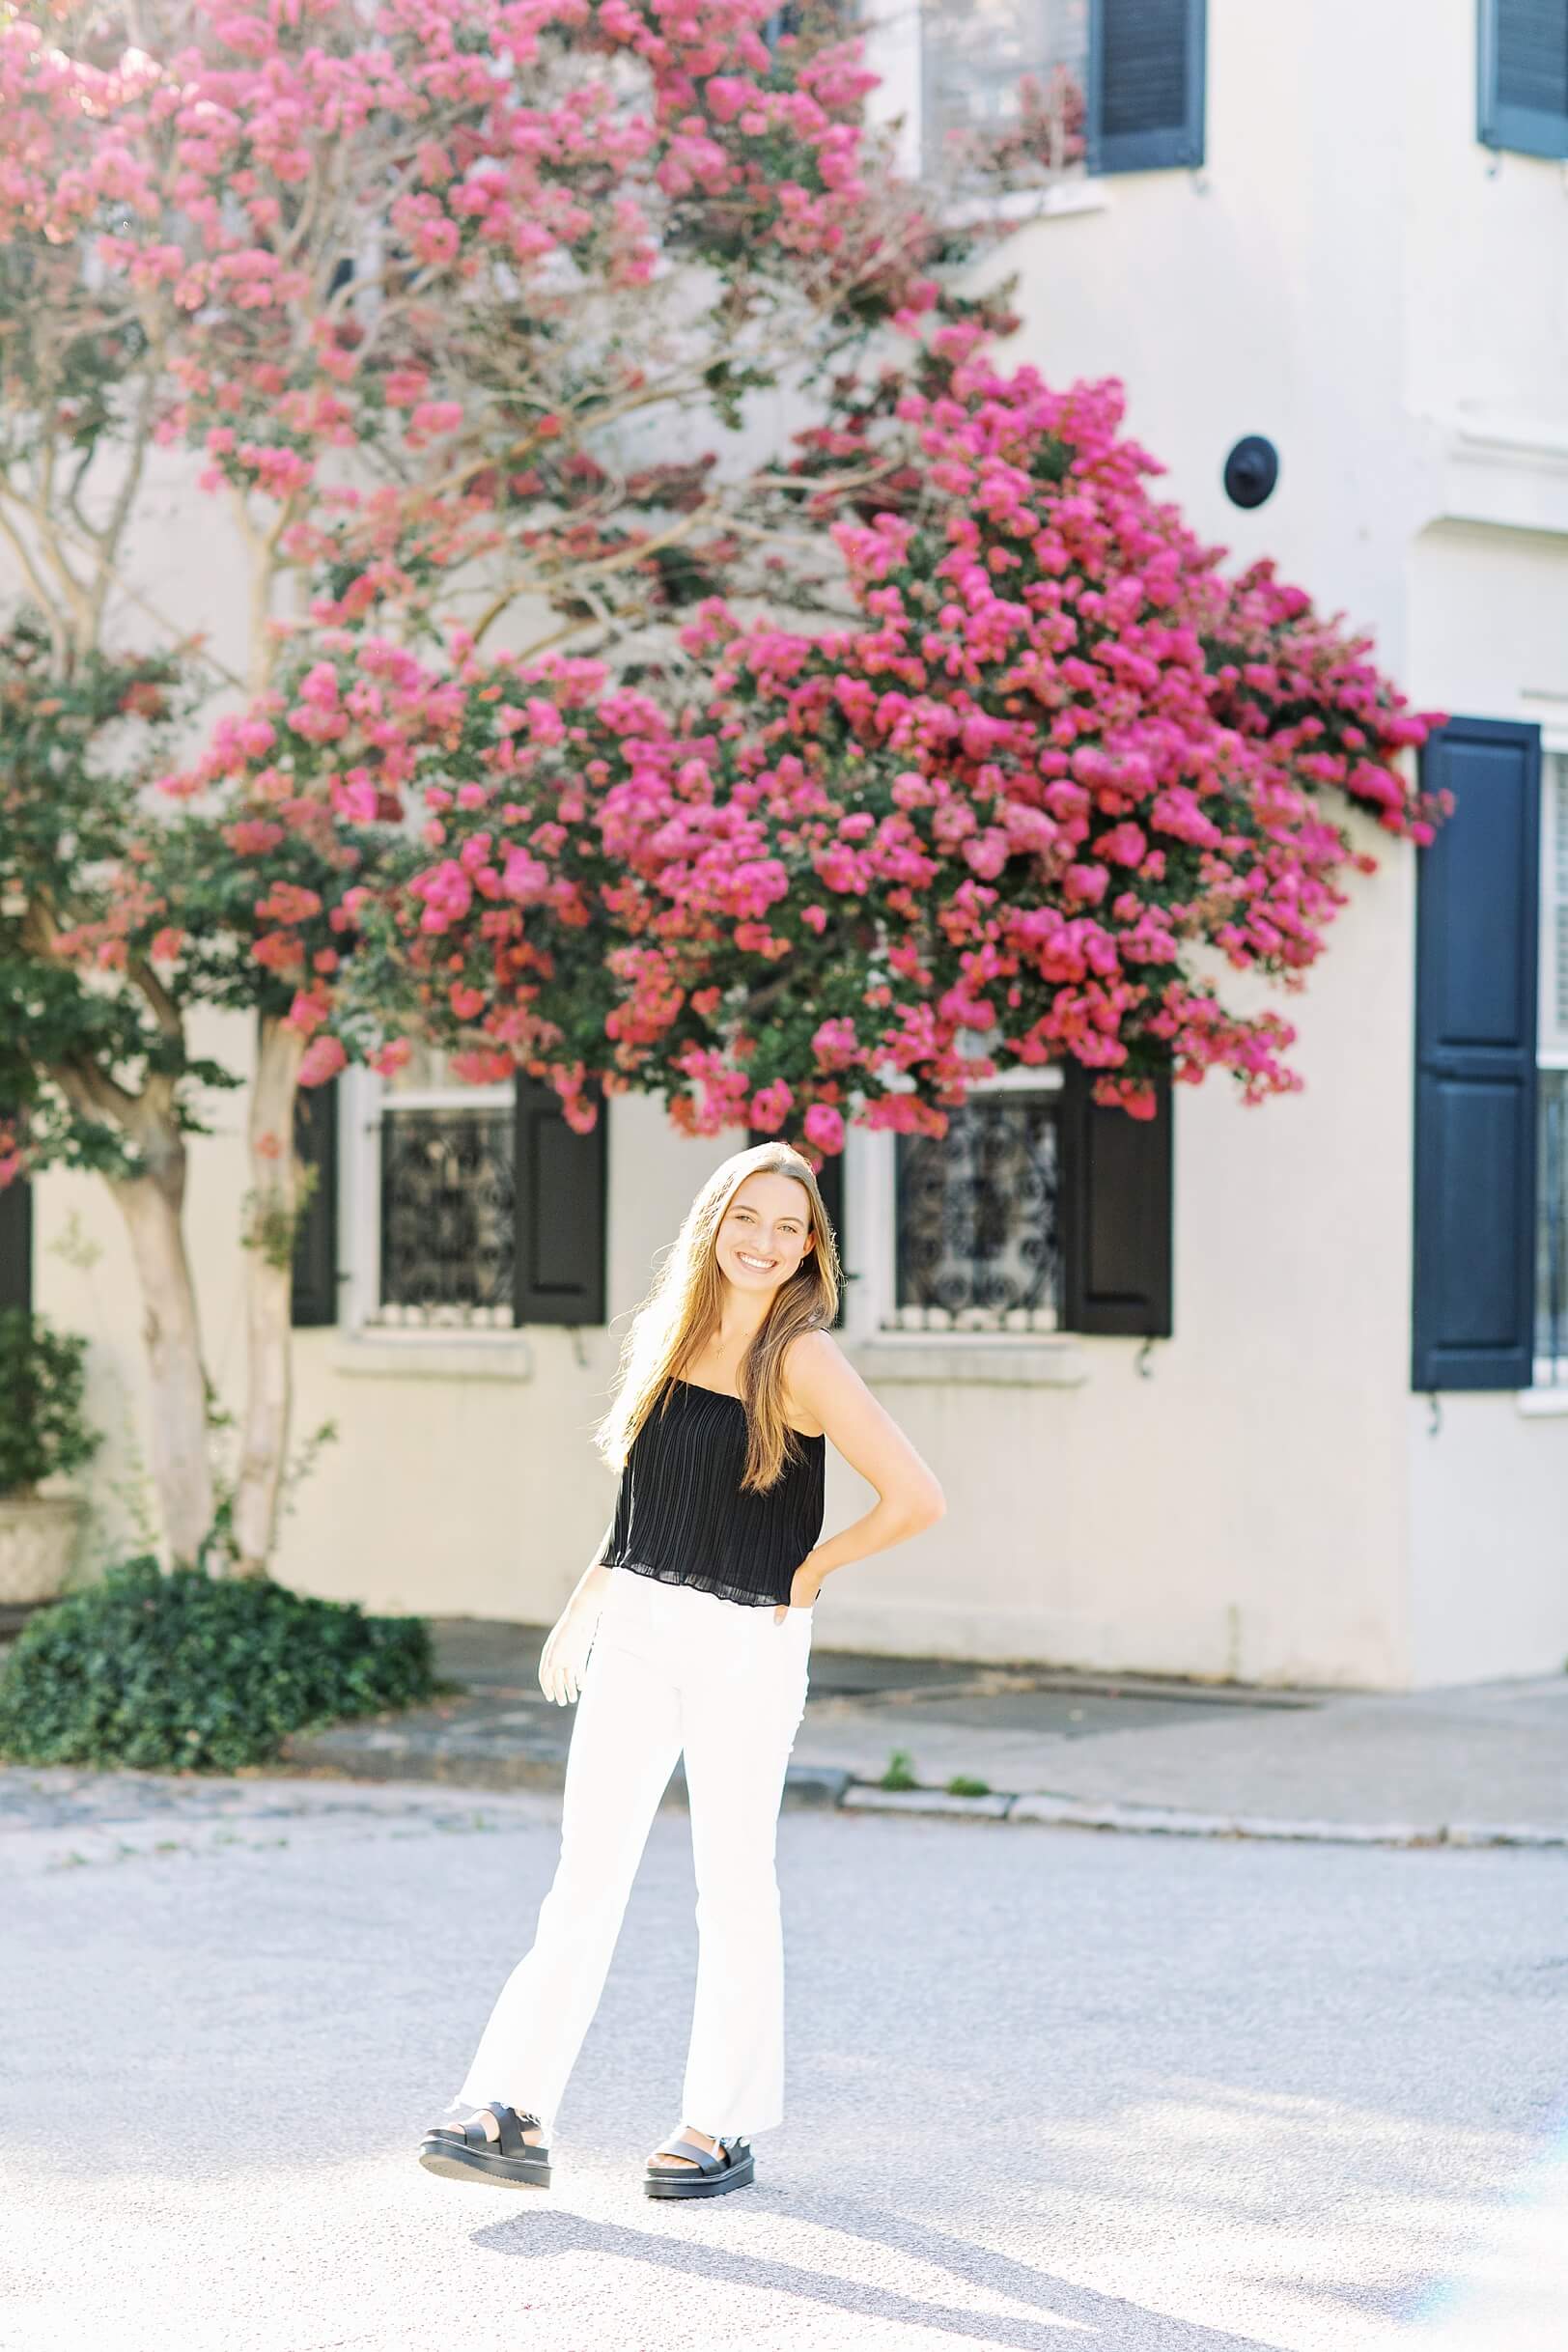 Charleston's Chalmers Street with pink crepe myrtle | Kaitlin Scott Photography